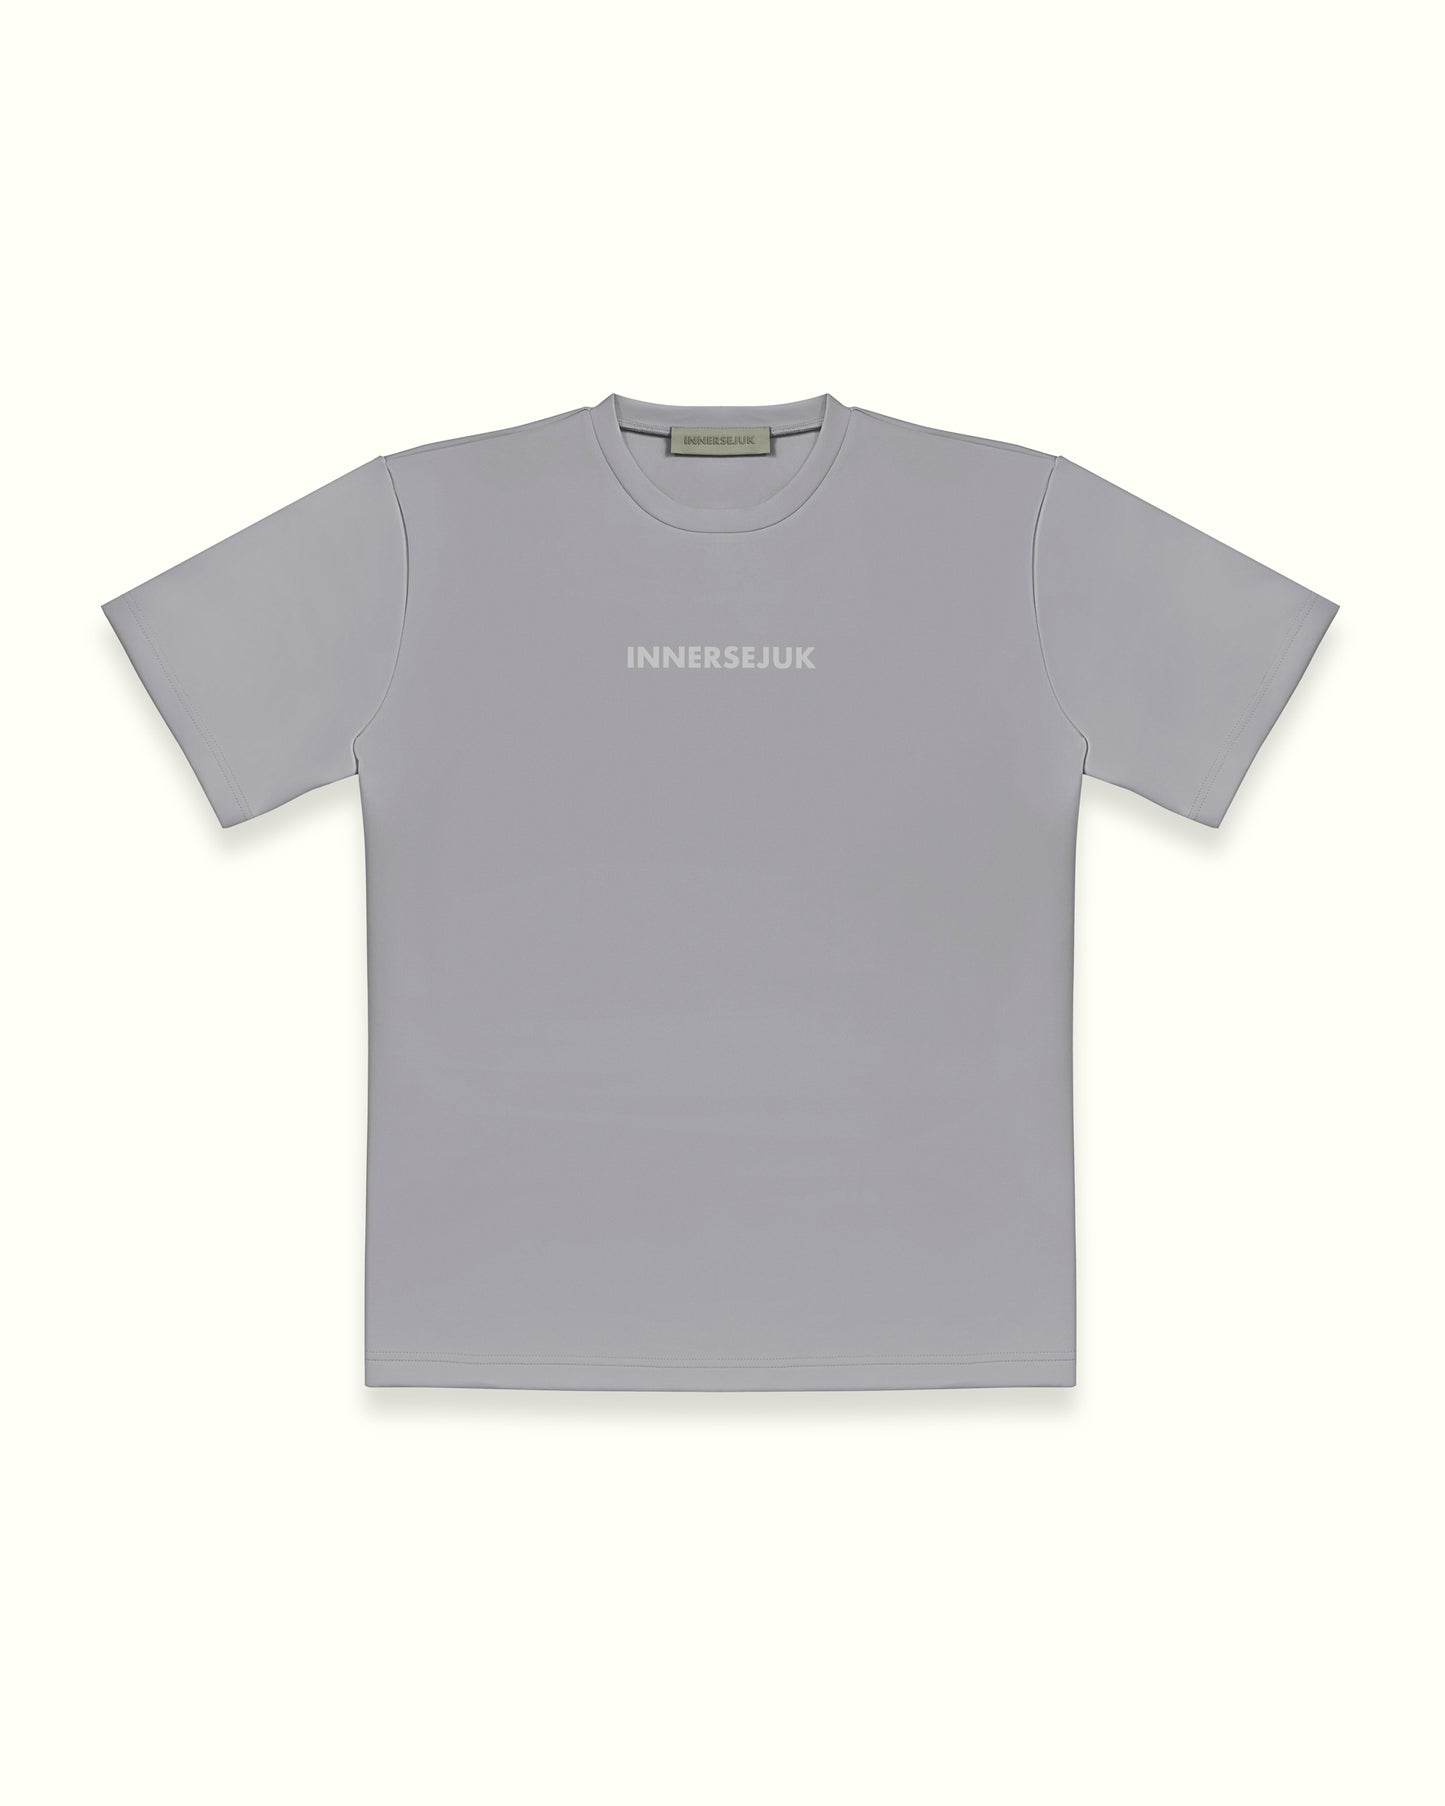 THE SIGNATURE RELAXED TEE IN LIGHT GREY